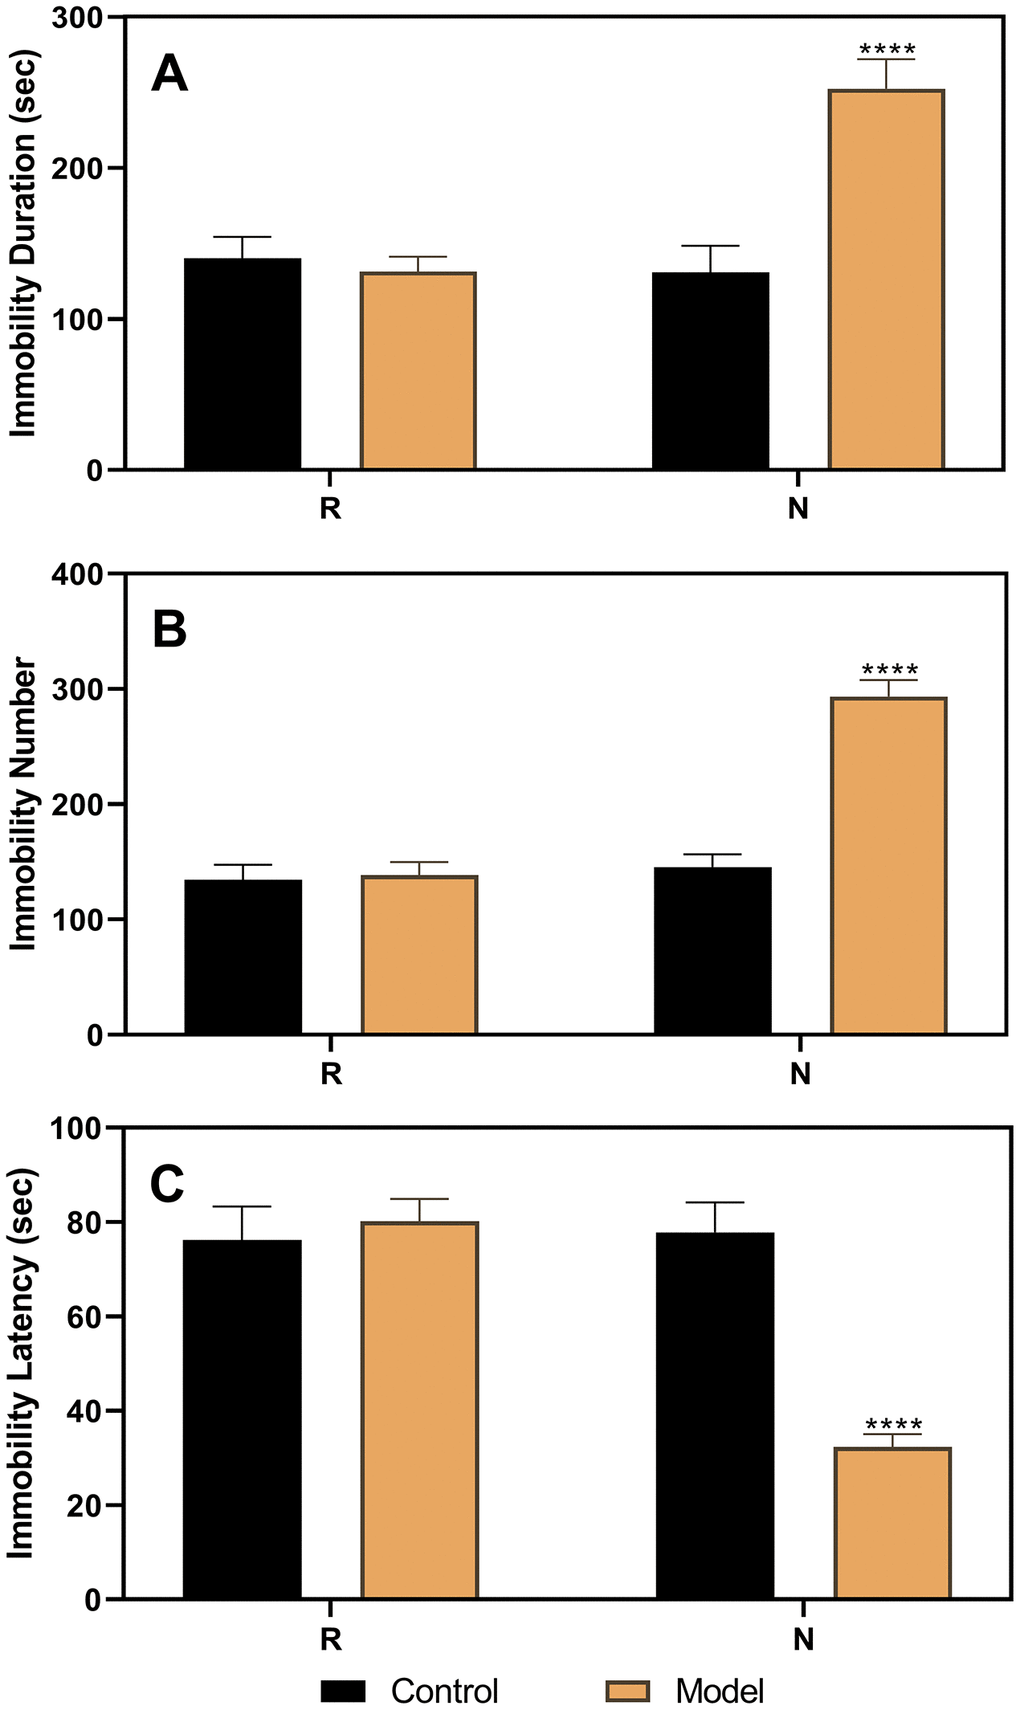 Results of the forced swimming test after the hormone priming regimen. (A) Results of immobility duration. (B) Results of immobility number. (C) Results of immobility latency. N, the test in the non-receptive phase; R, the test in the receptive phase. ****p